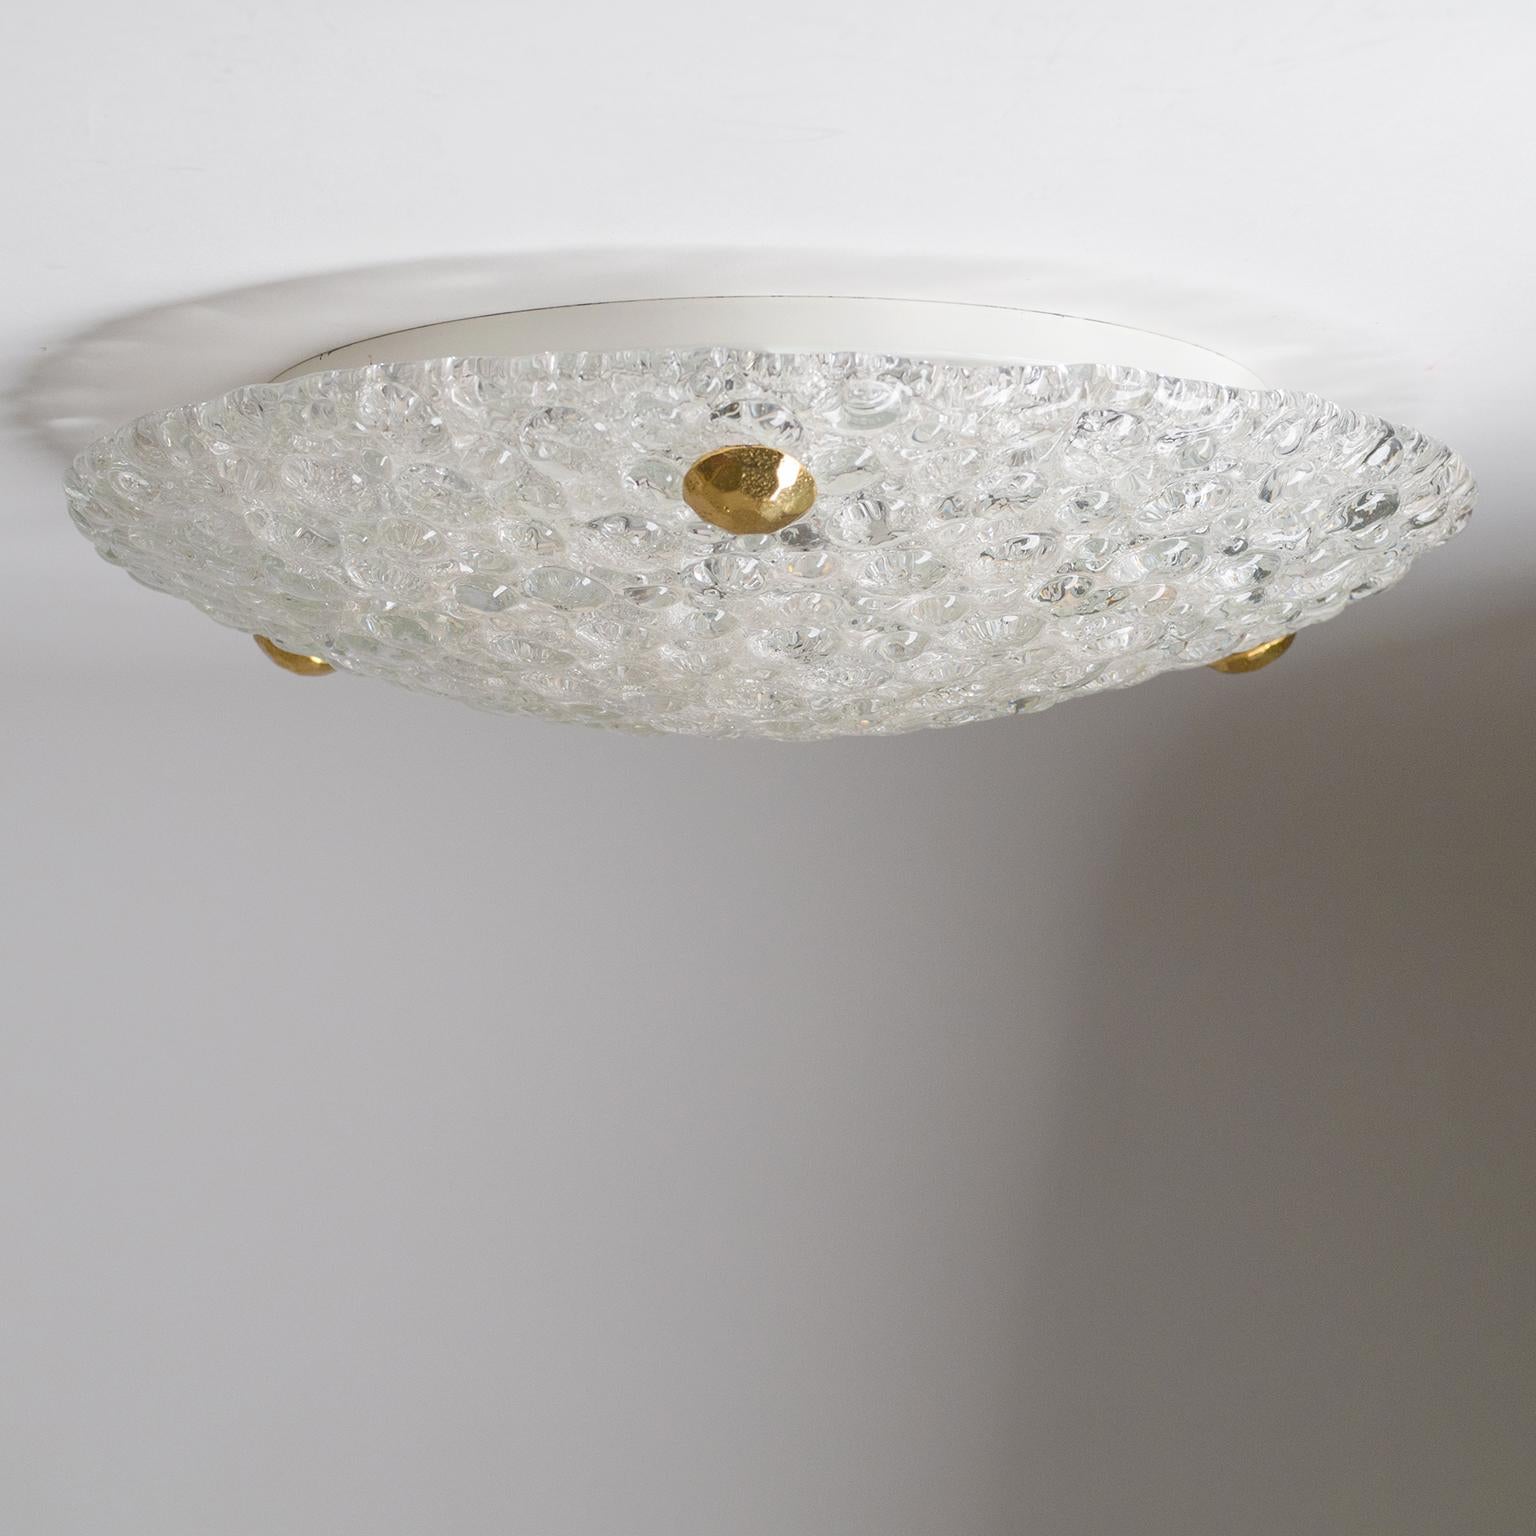 Fine flush mount by Hillebrand with thick bubble-textured glass. Three large sculpted brass knobs affix the glass to a white lacquered back plate which holds three E14 ceramic sockets as well as a manufacturers label. Would also make for an